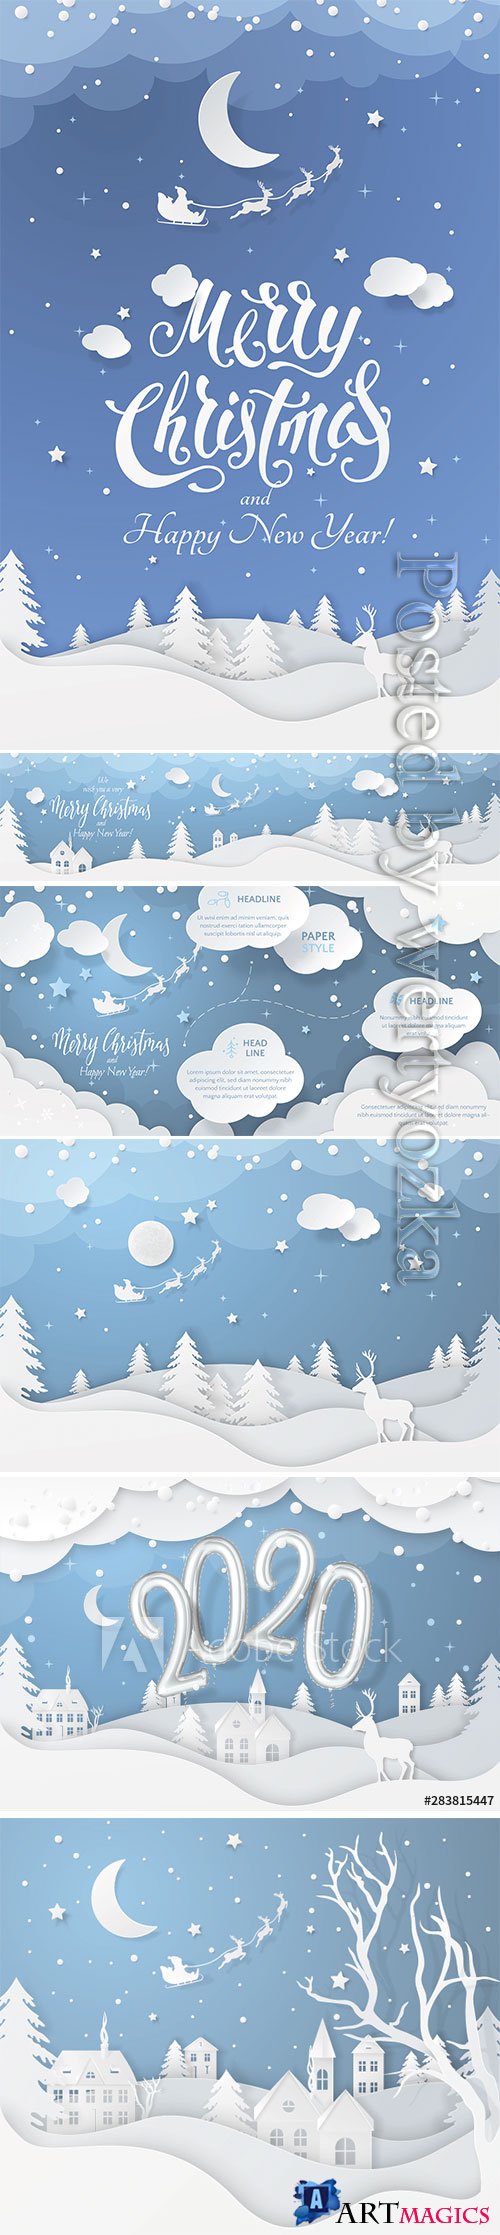 Vector winter night scene with fir trees, houses, moon, deer and realistic 2020 numbers